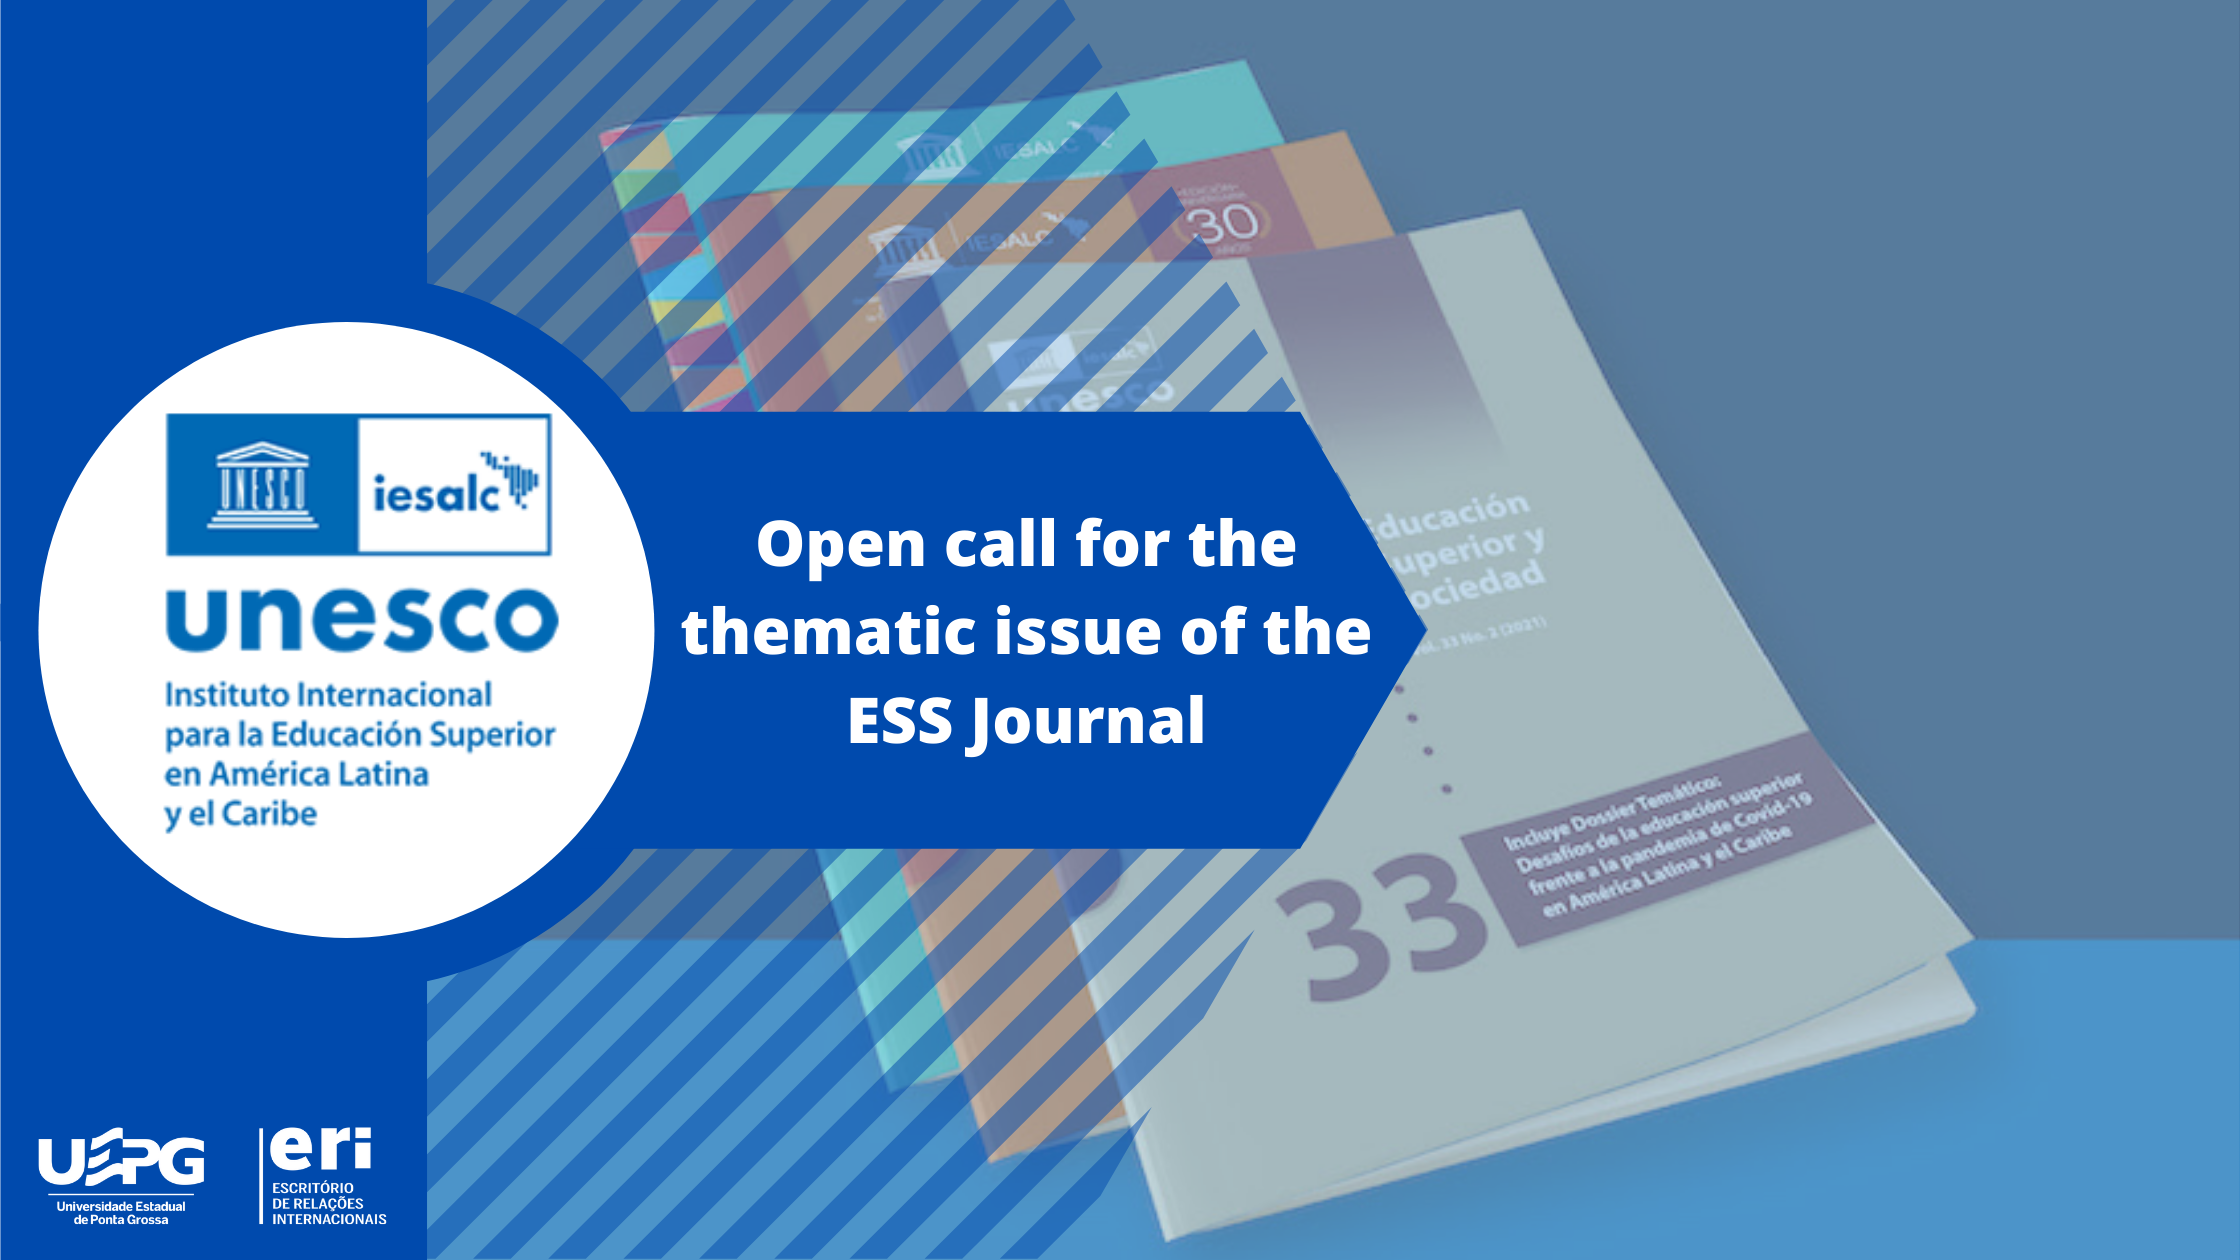 Open call for the thematic issue of the ESS Journal